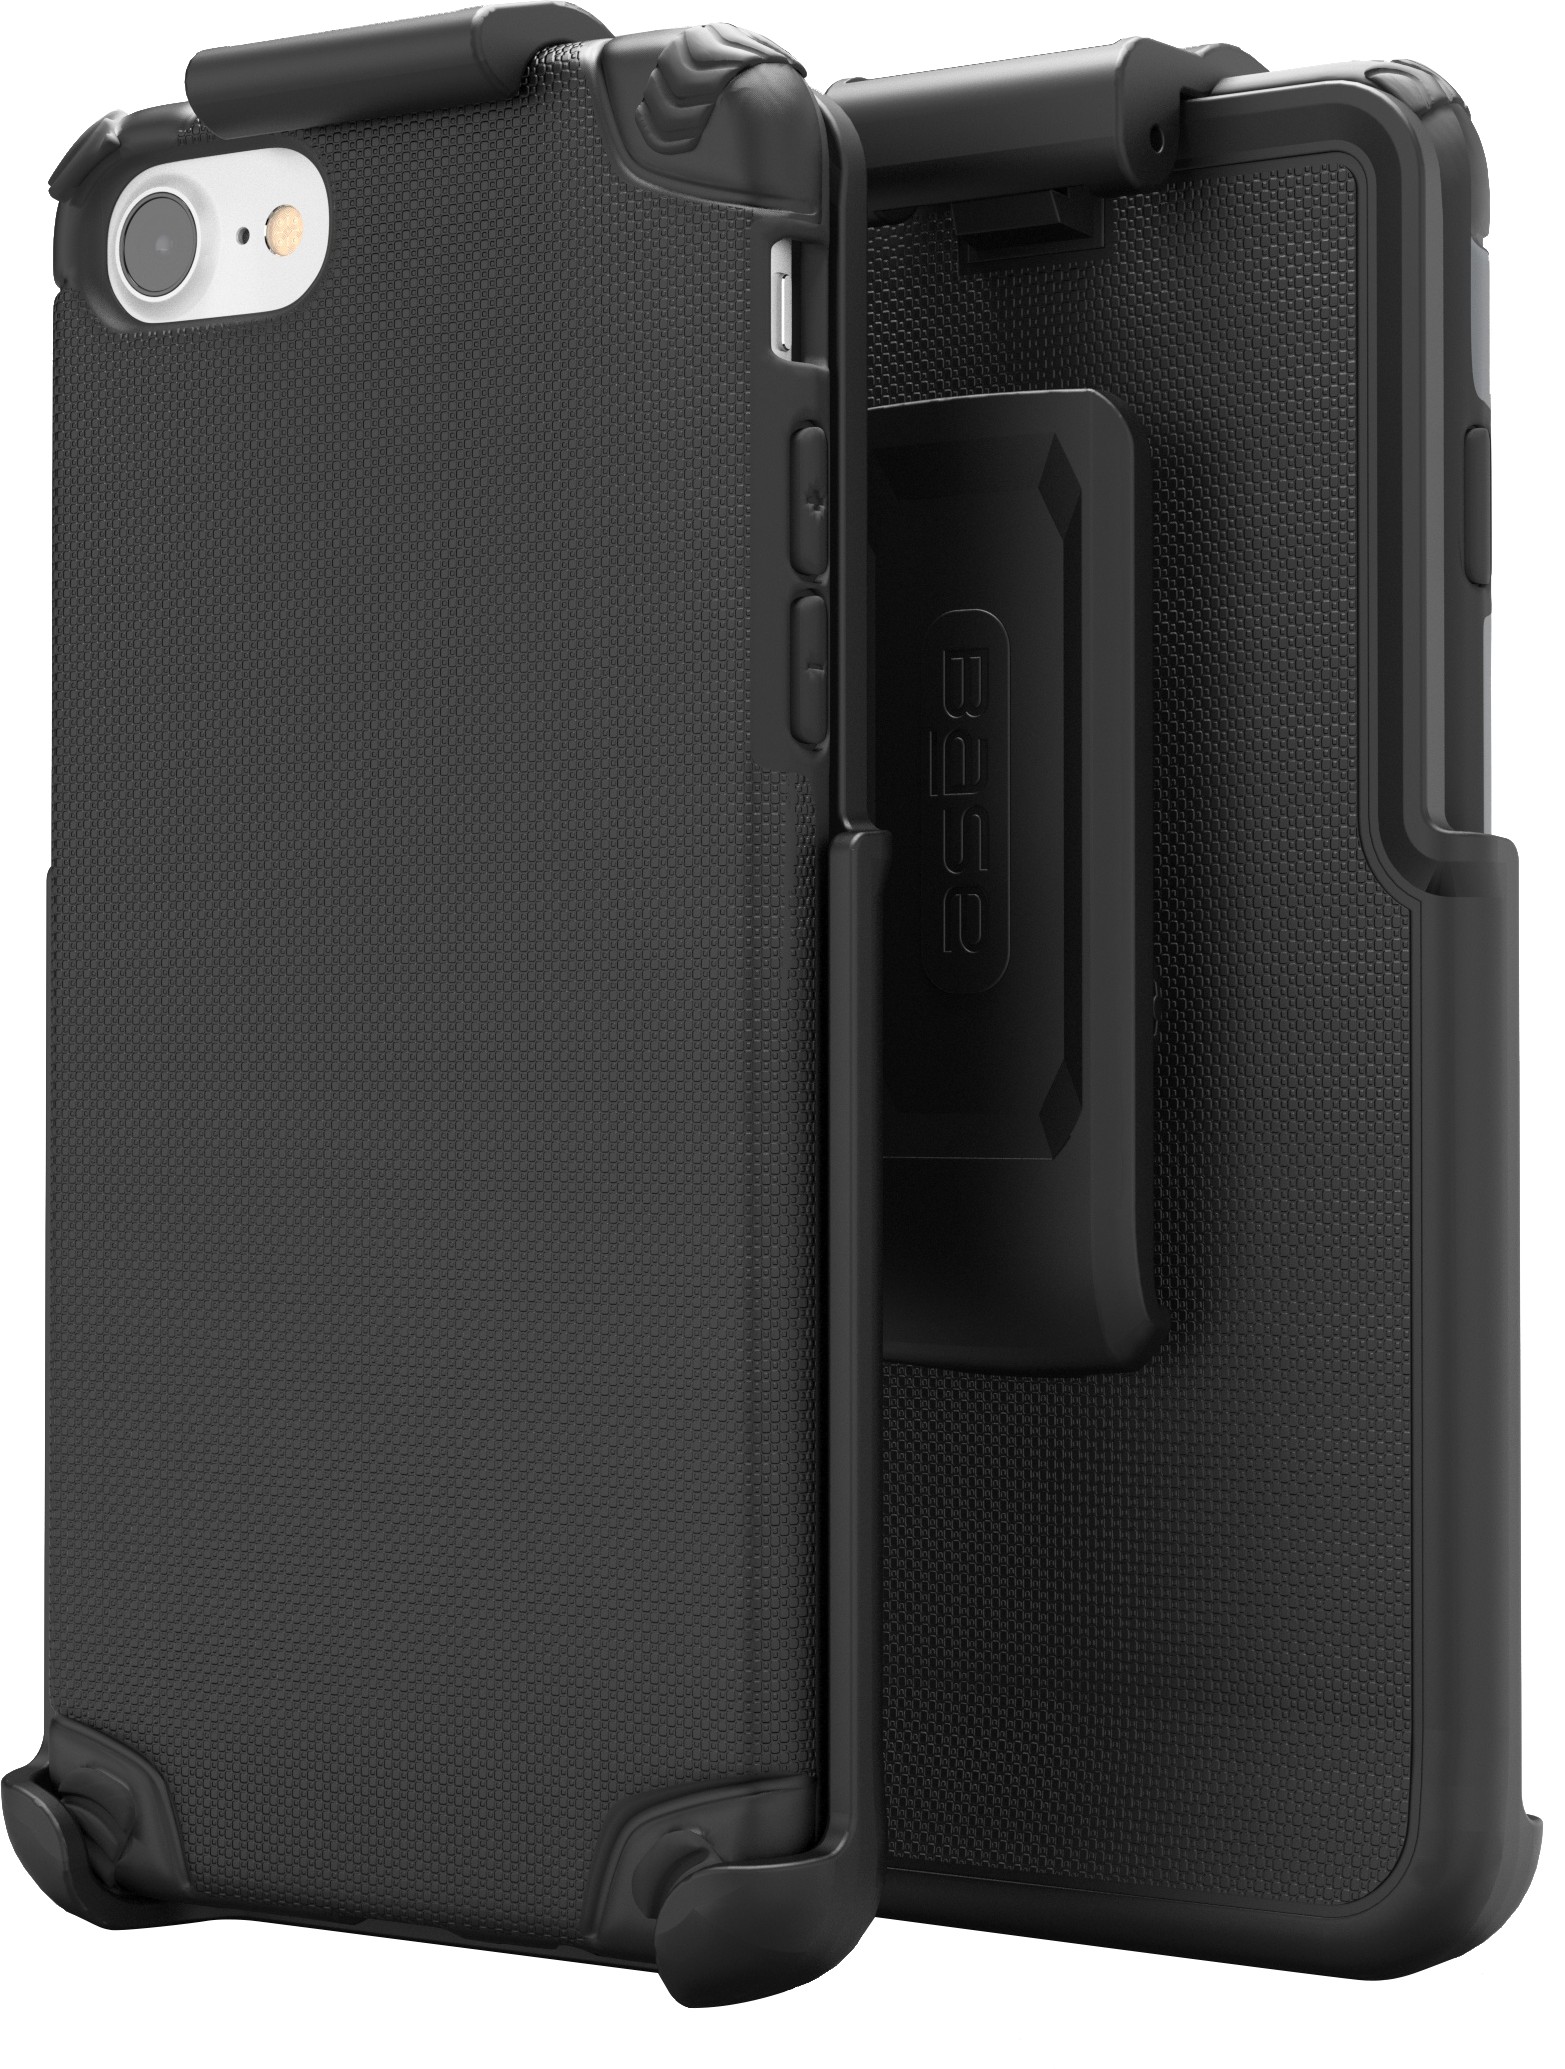 Two-Piece Black Rugged Protective Case with Strap Holder for iPhone 7/8 plus cell phones